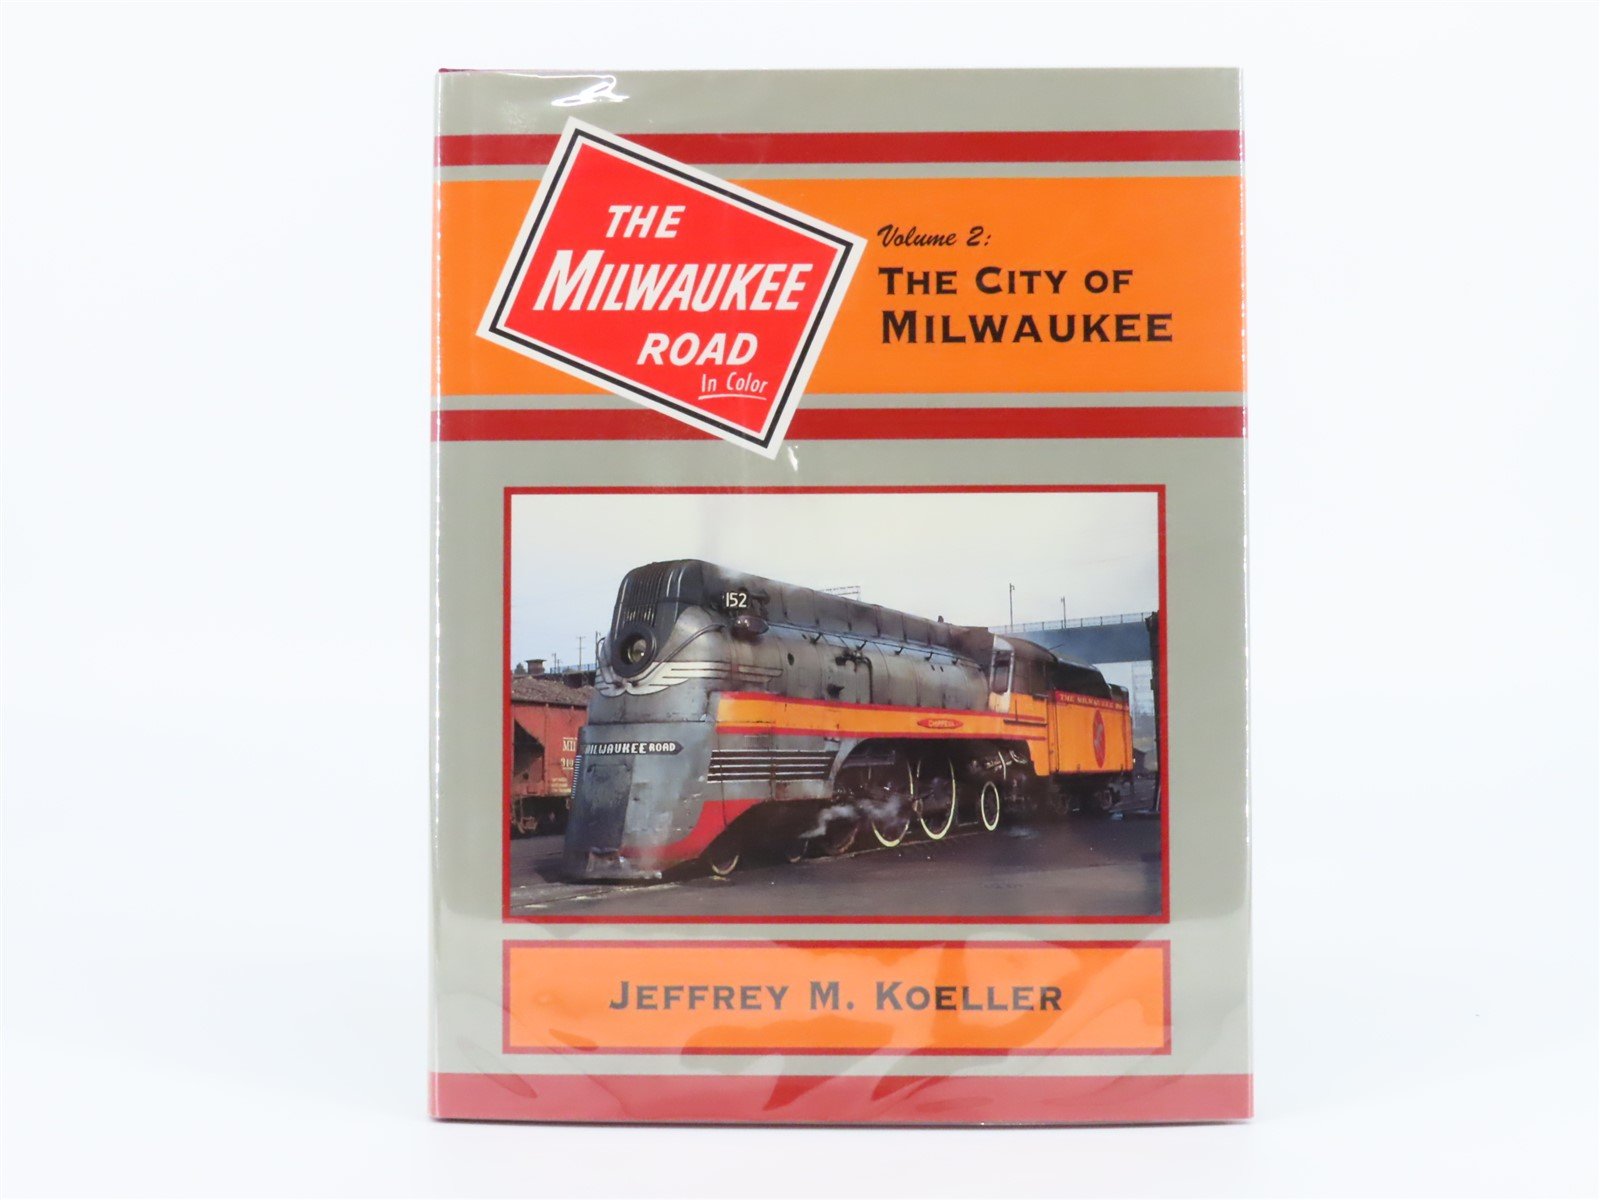 Morning Sun: MILW In Color Vol. 2 The City Of Milwaukee by Koeller ©1996 HC Book